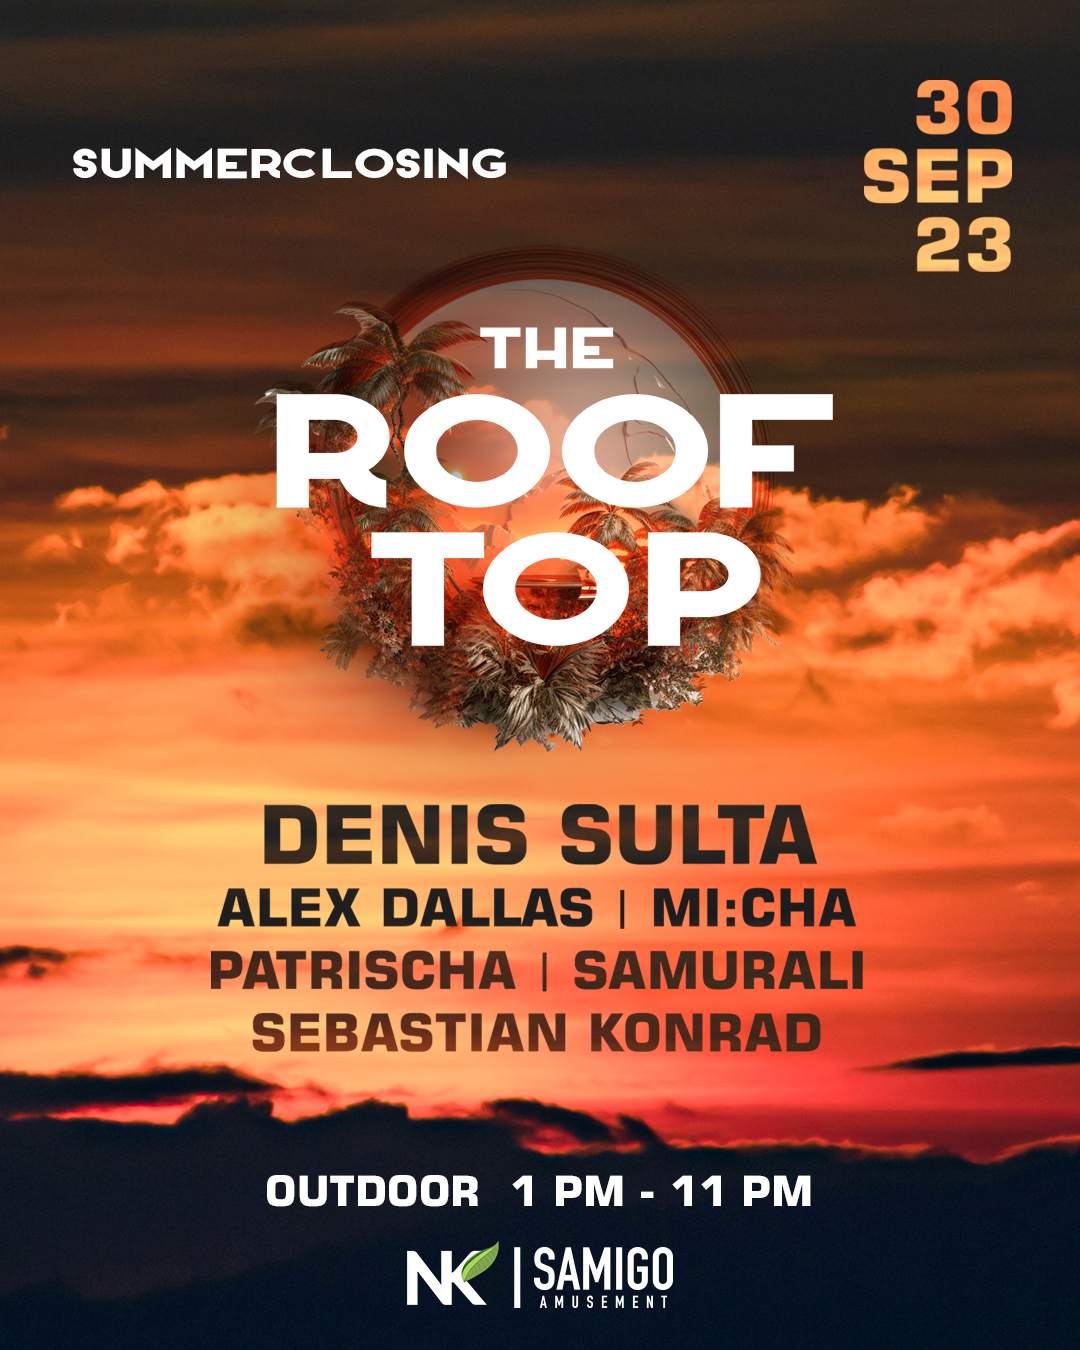 The Rooftop Summerclosing with Denis Sulta - フライヤー表